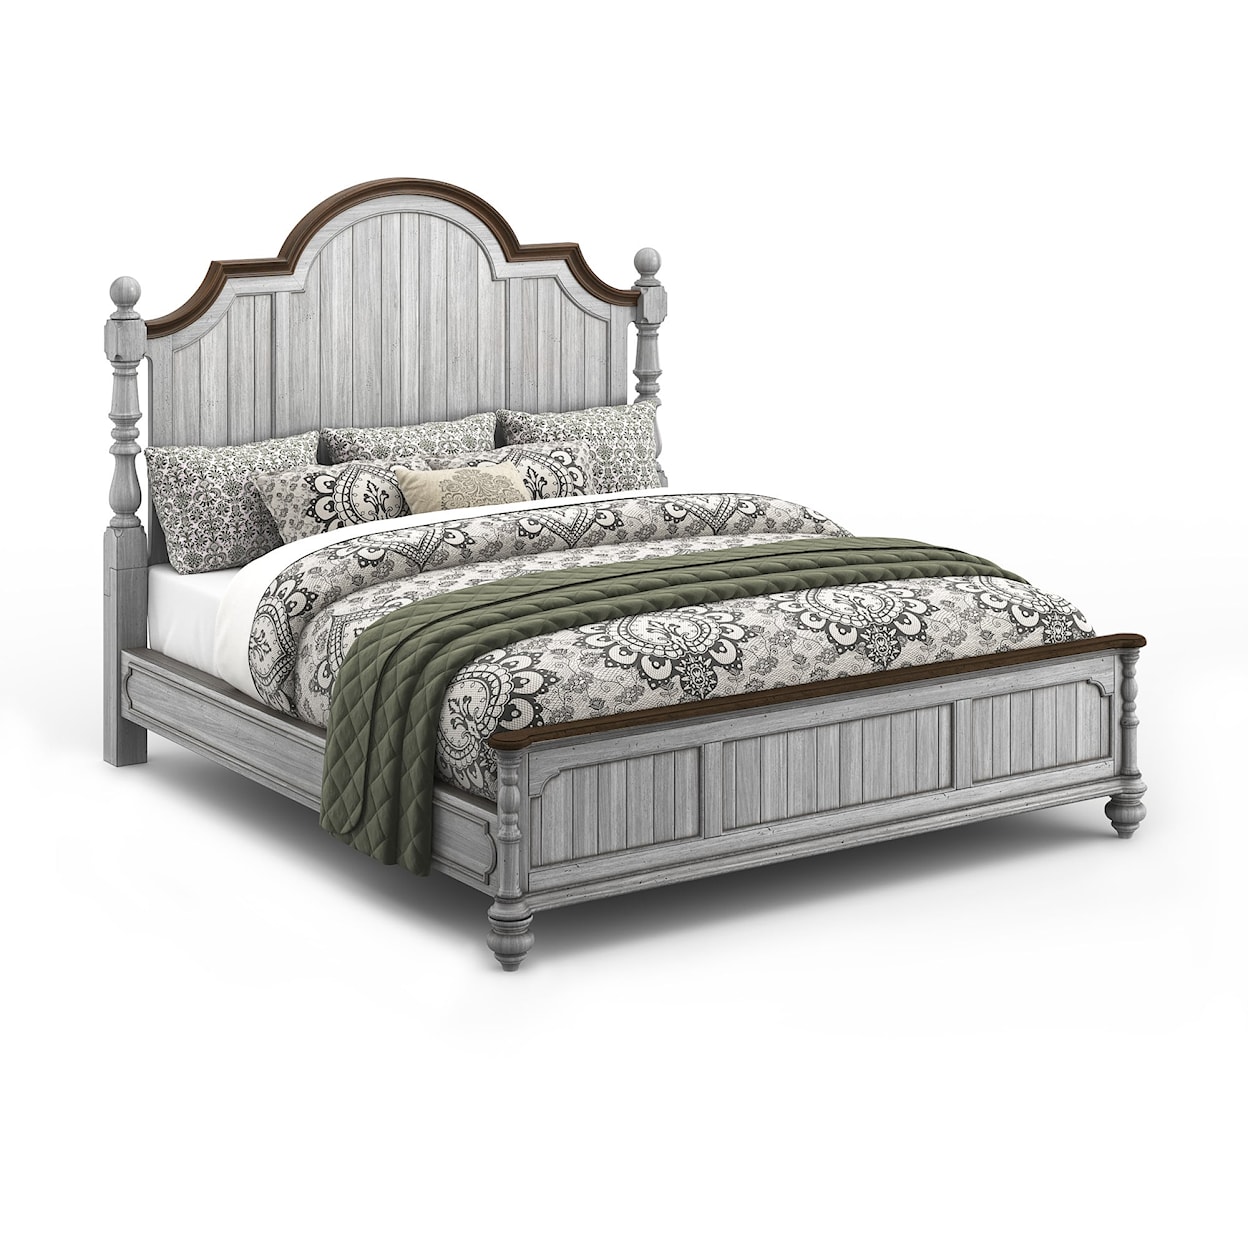 Flexsteel Wynwood Collection Plymouth Cal King Poster Bed